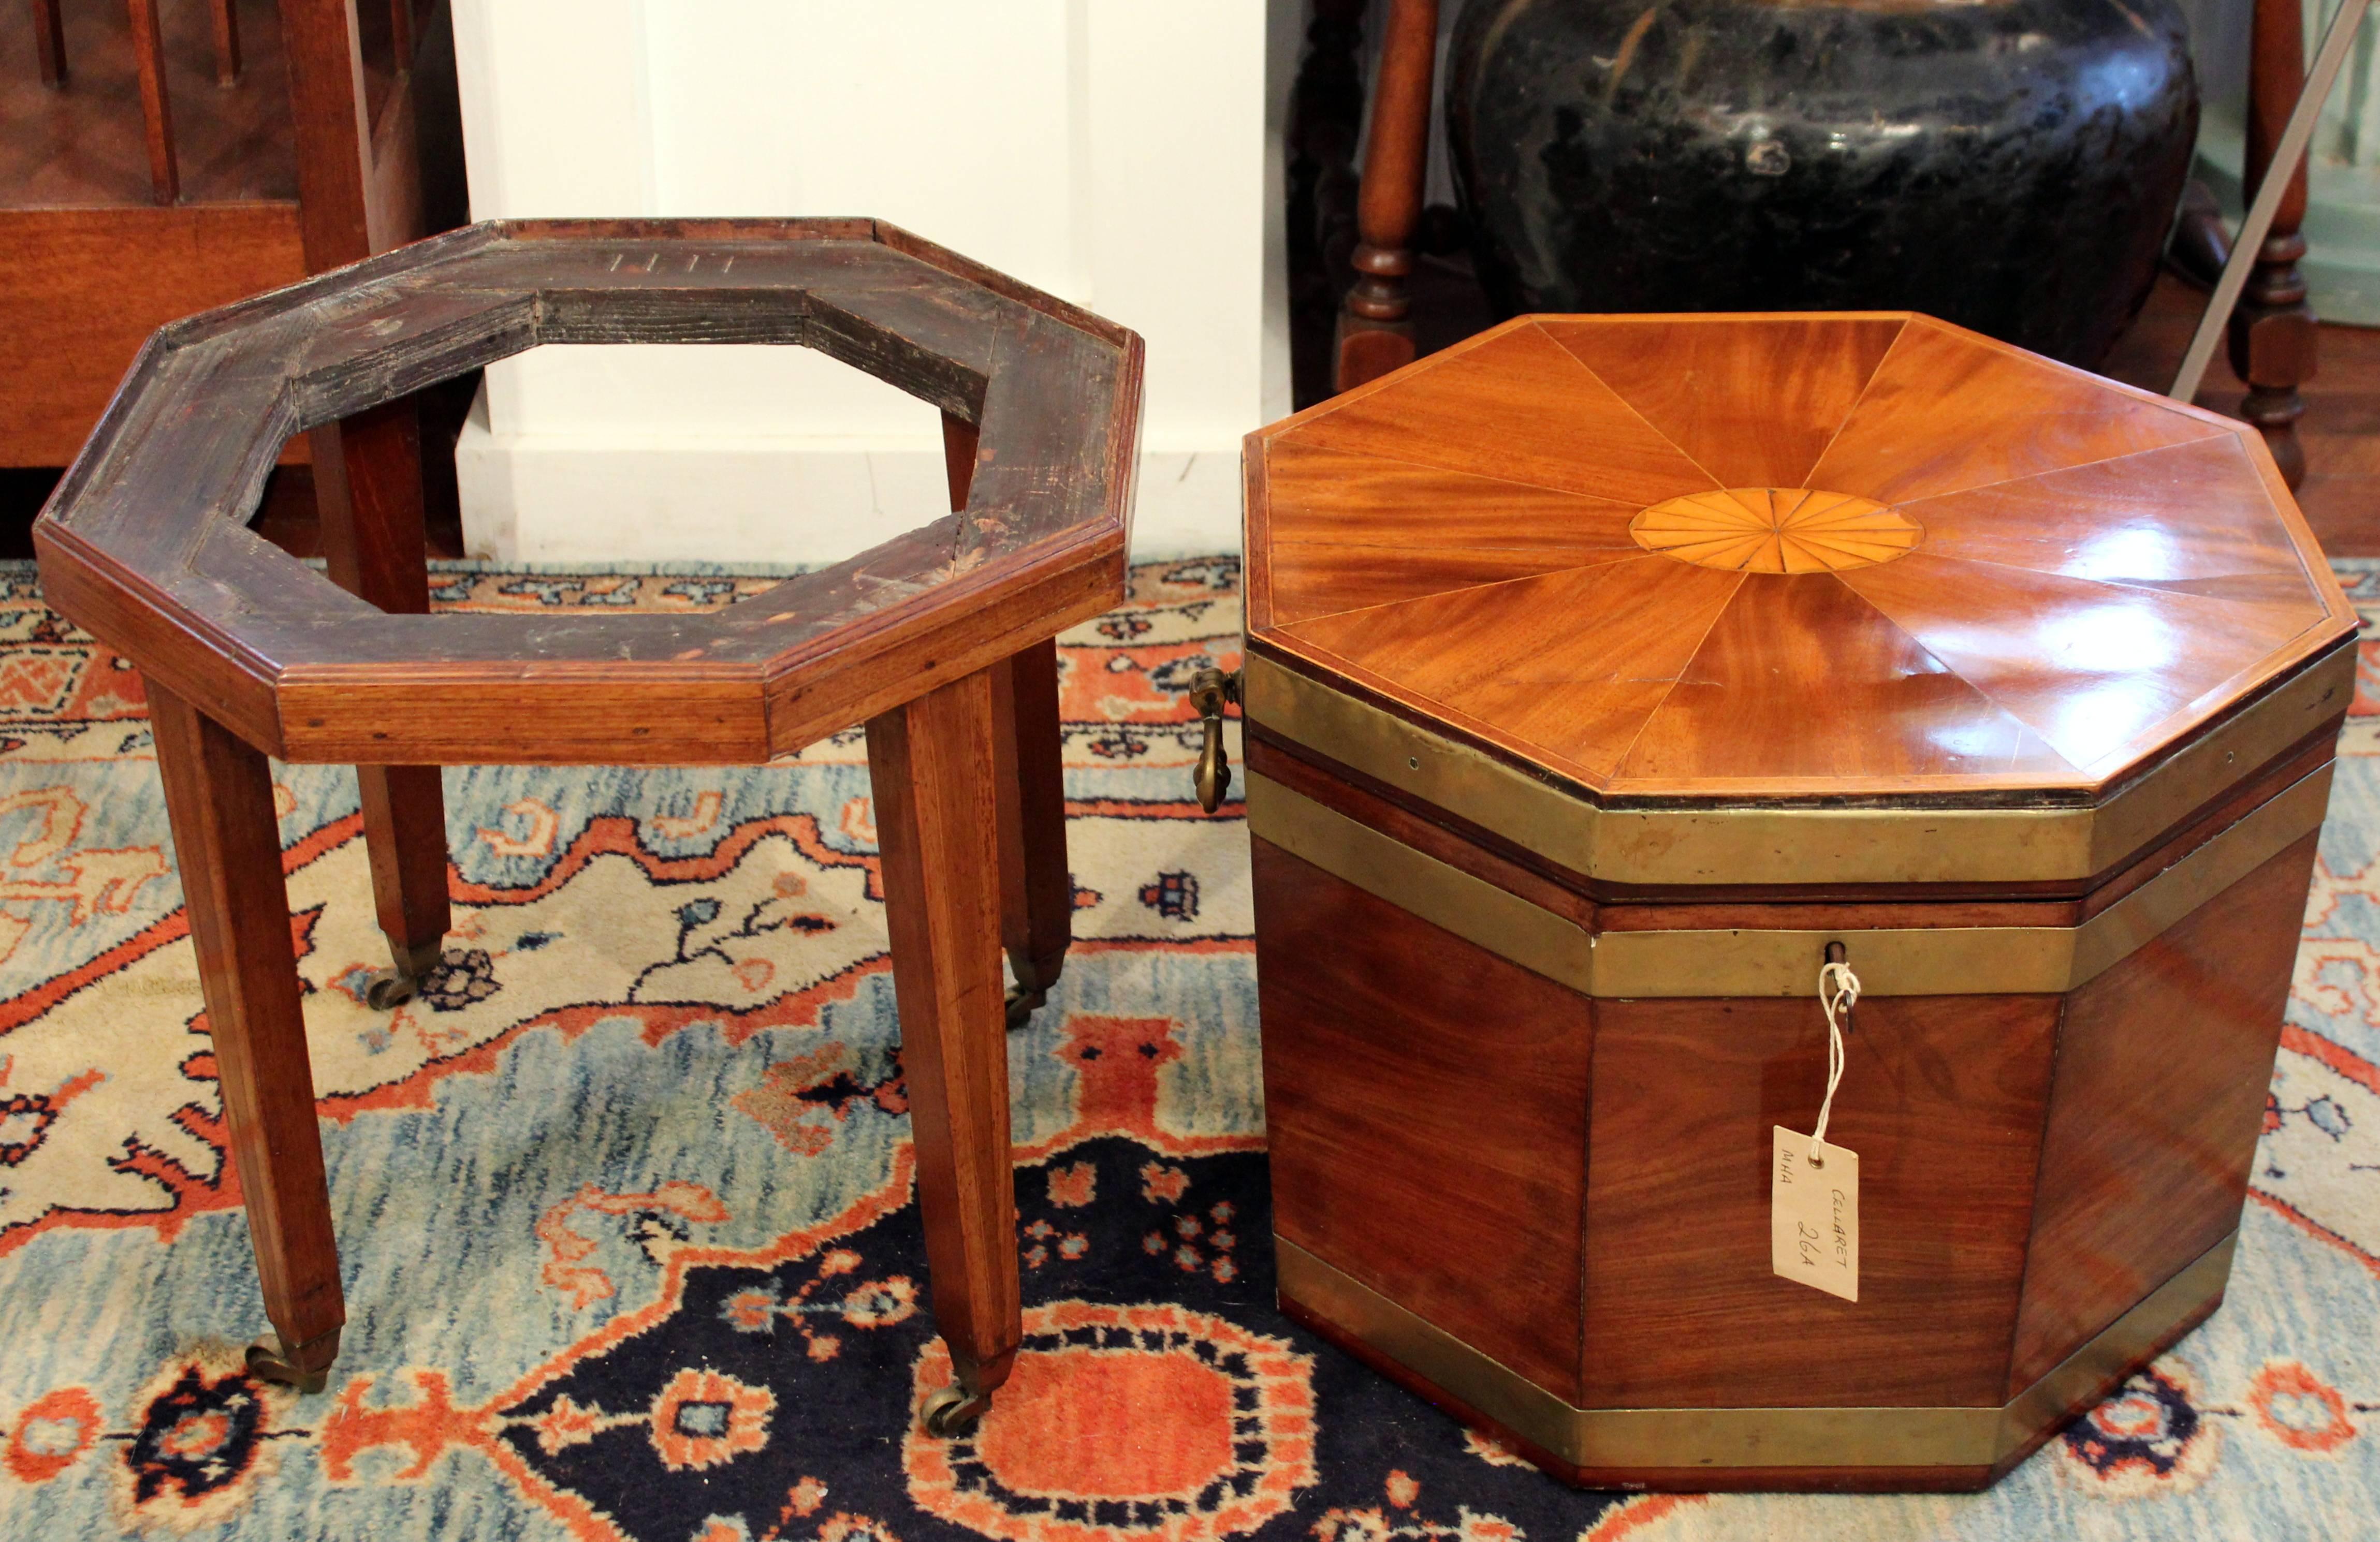 This superb quality George III inlaid satinwood and mahogany wine cooler features a more unusual octagonal shape with decorative brass banding, double hinge on the back, with original liner and cast brass lifting handles. It is supported on its